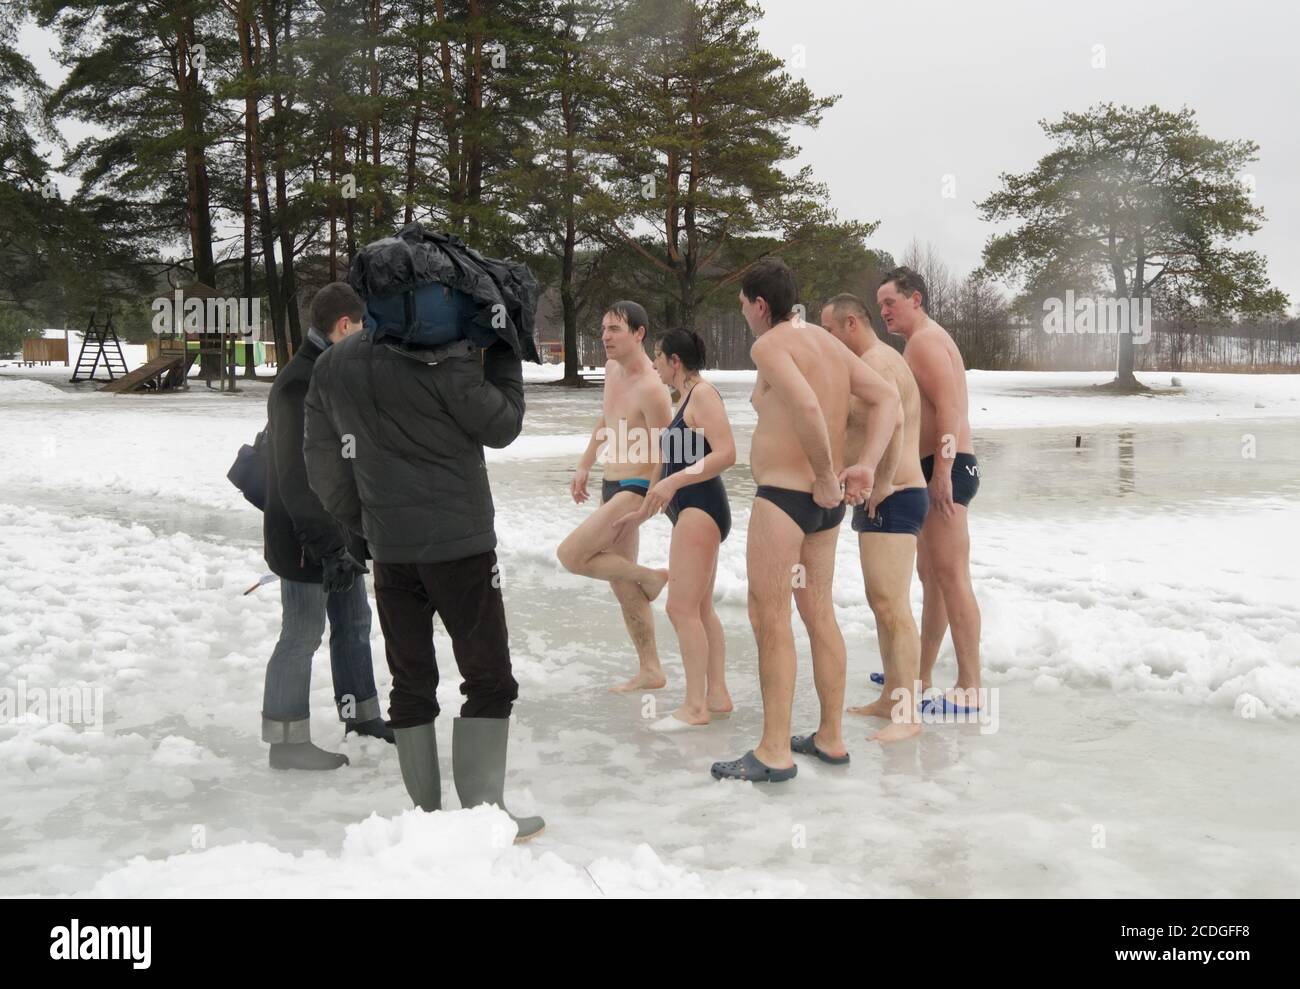 VILNIUS, LITHUANIA – FEBRUARY 5: Fans of winter swimming take a bath in some ice water on February 5, 2011 in Vilnius, Lithuan Stock Photo